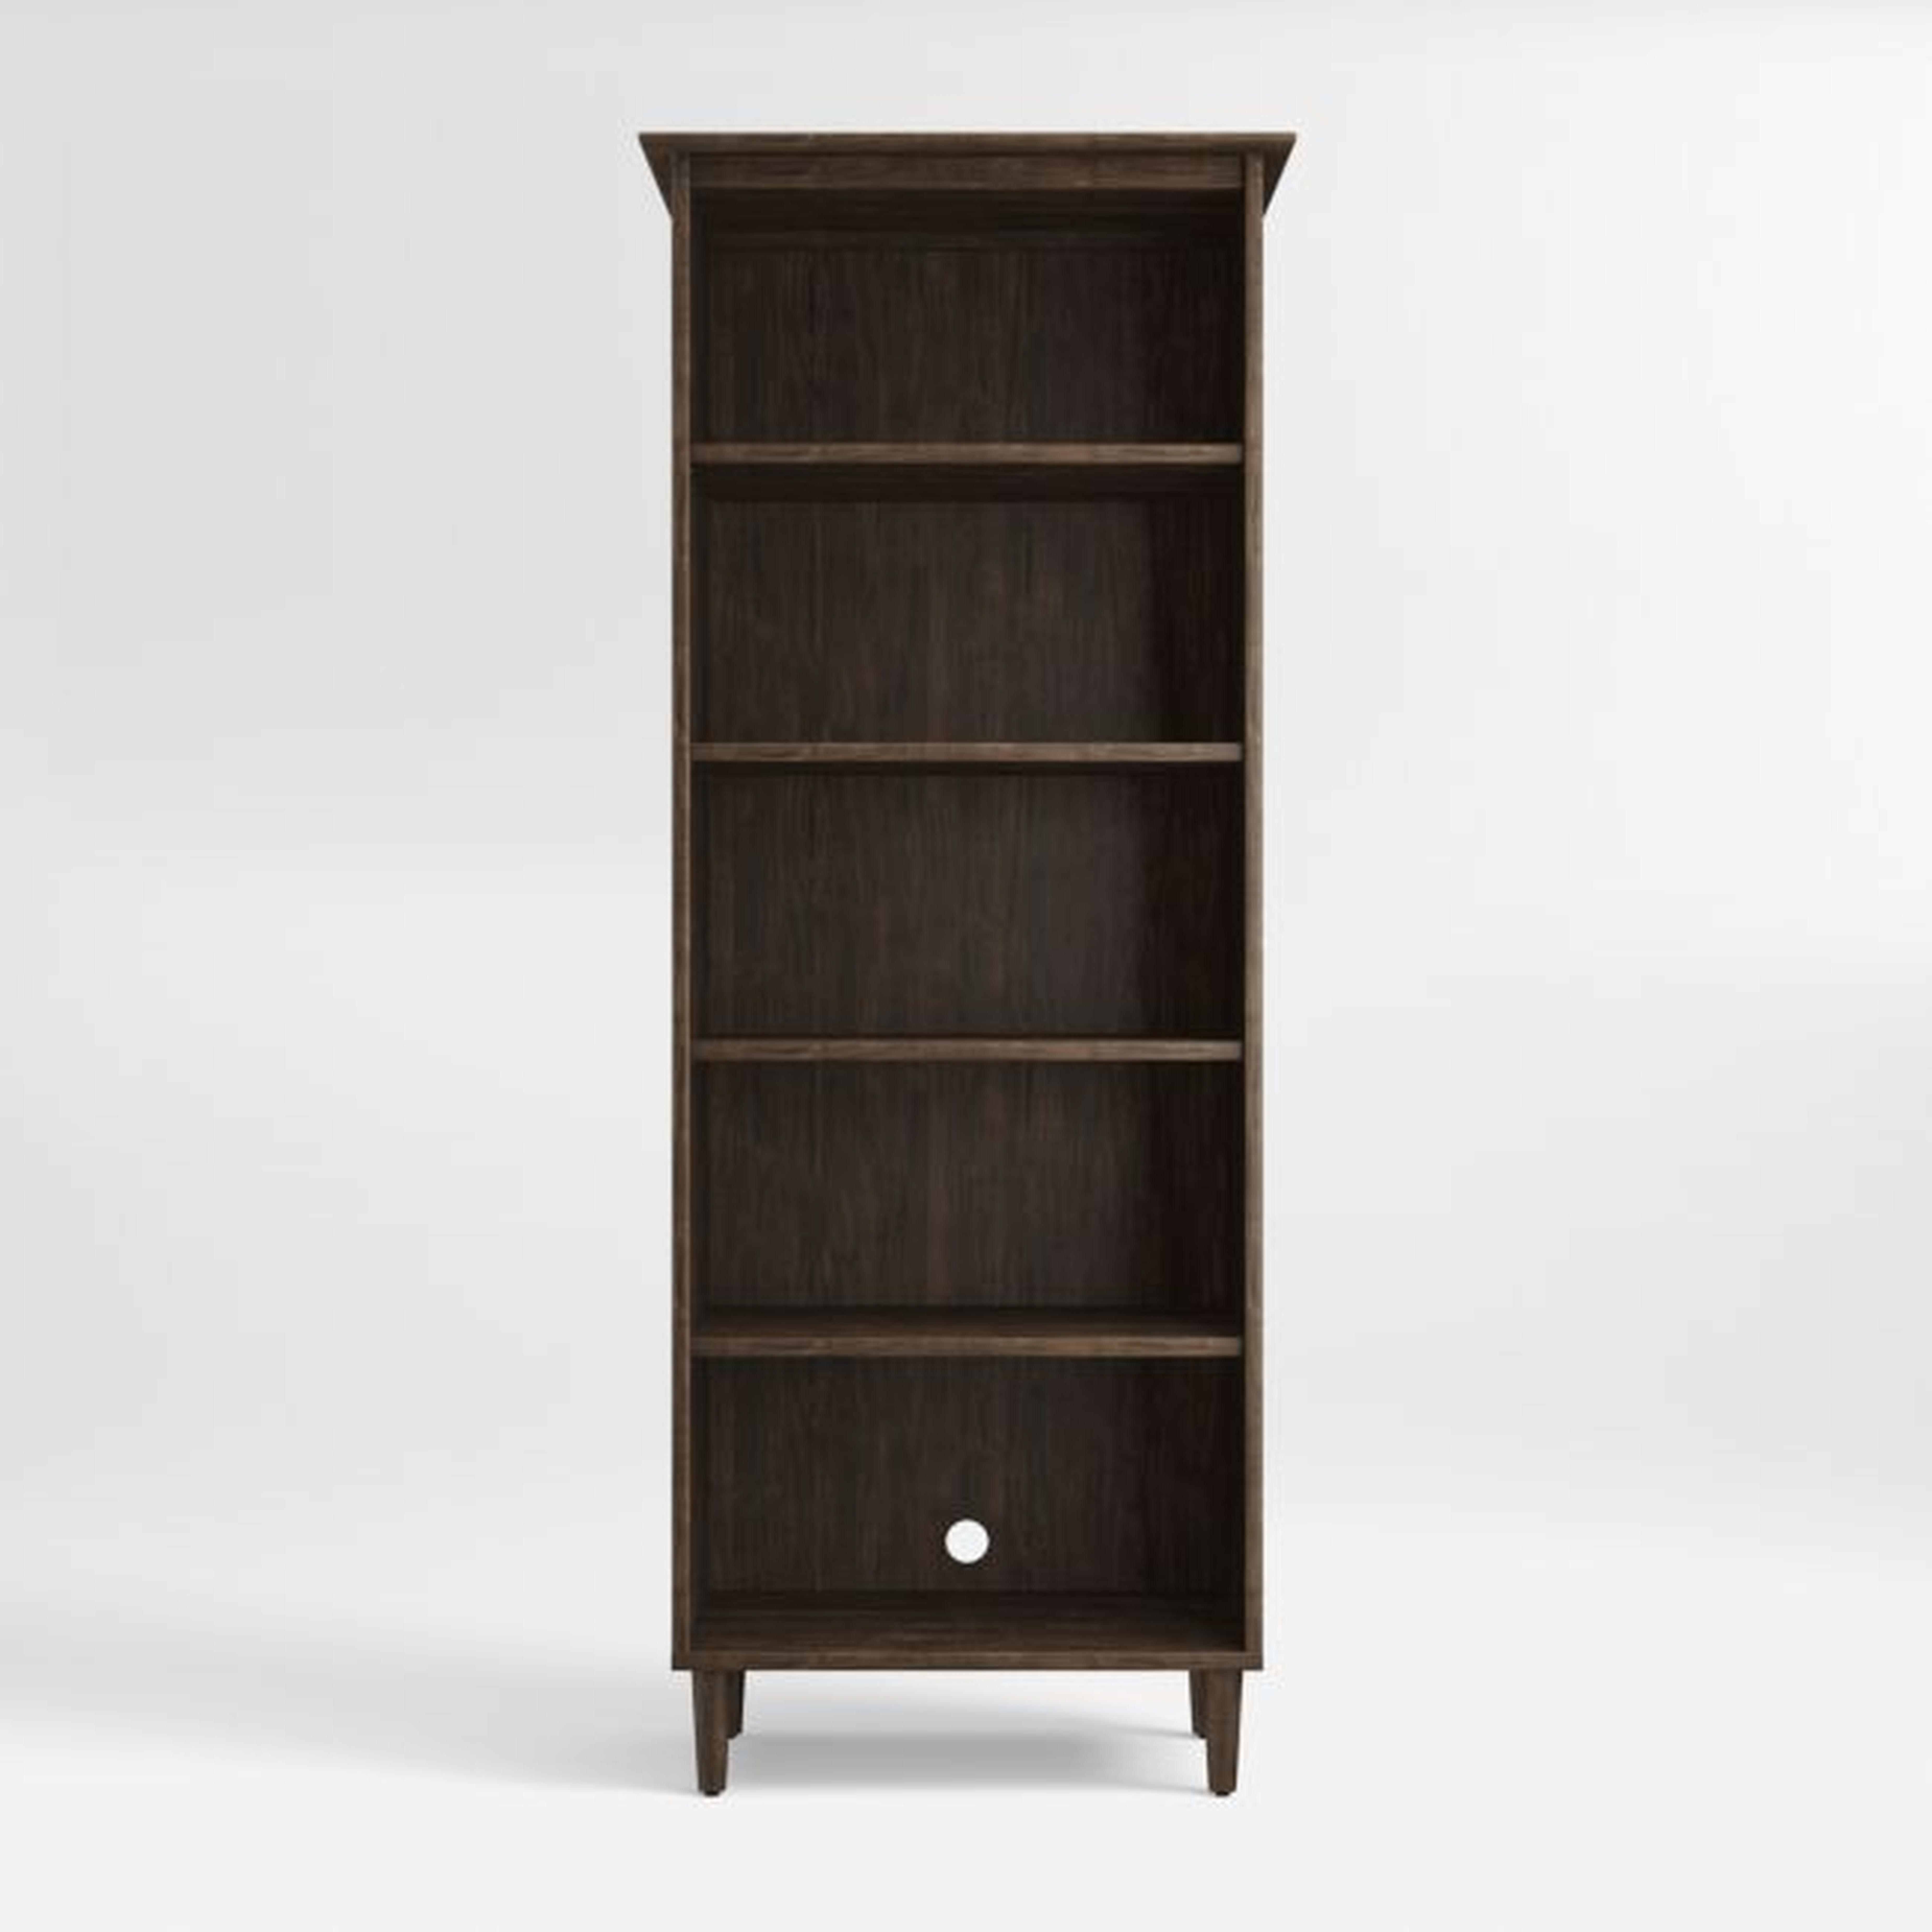 Kendall Charcoal Cherry Bookcase - Crate and Barrel